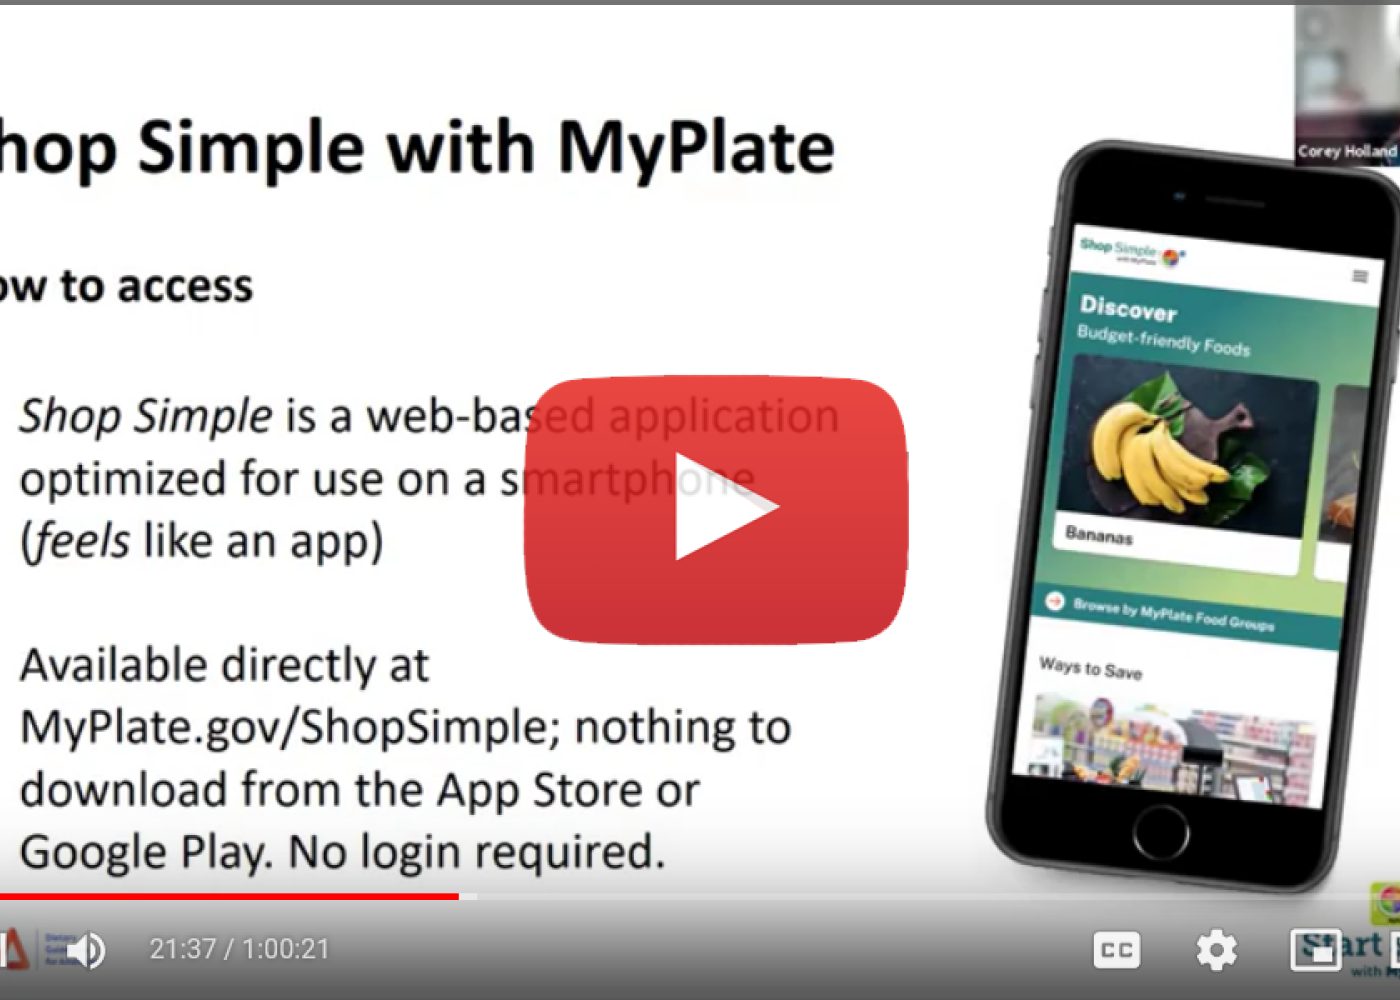 Screenshot of the Shop Simple with MyPlate webinar